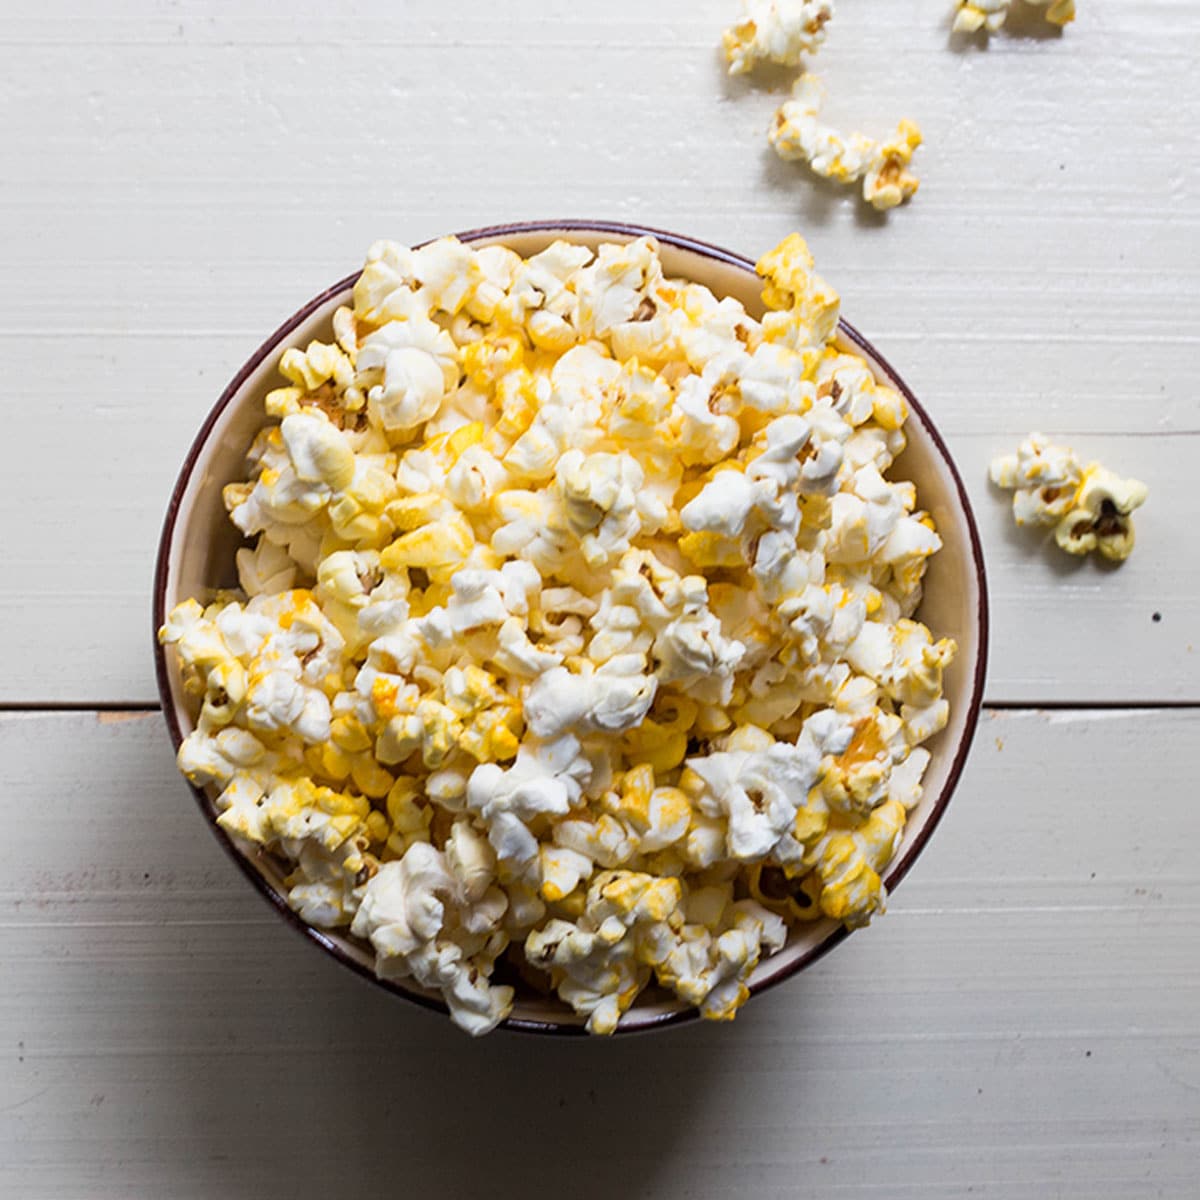 Prevent this by using a well-vented lid or leaving the pan slightly open to give you light and crispy popcorn instead of chewy popcorn. 